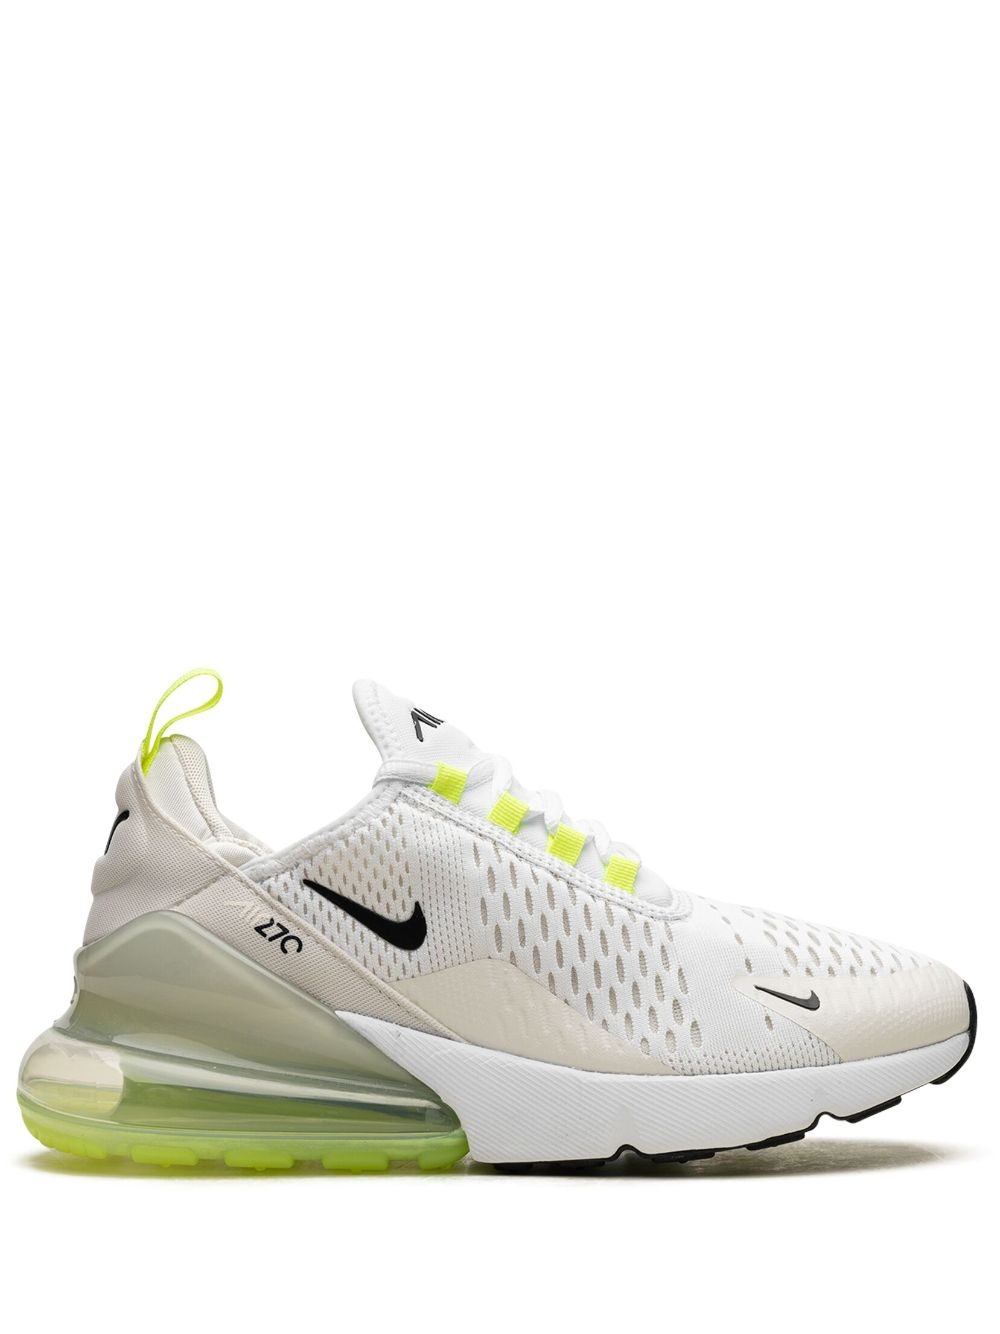 Air Max 270 "White/Ghost Green" sneakers - 1